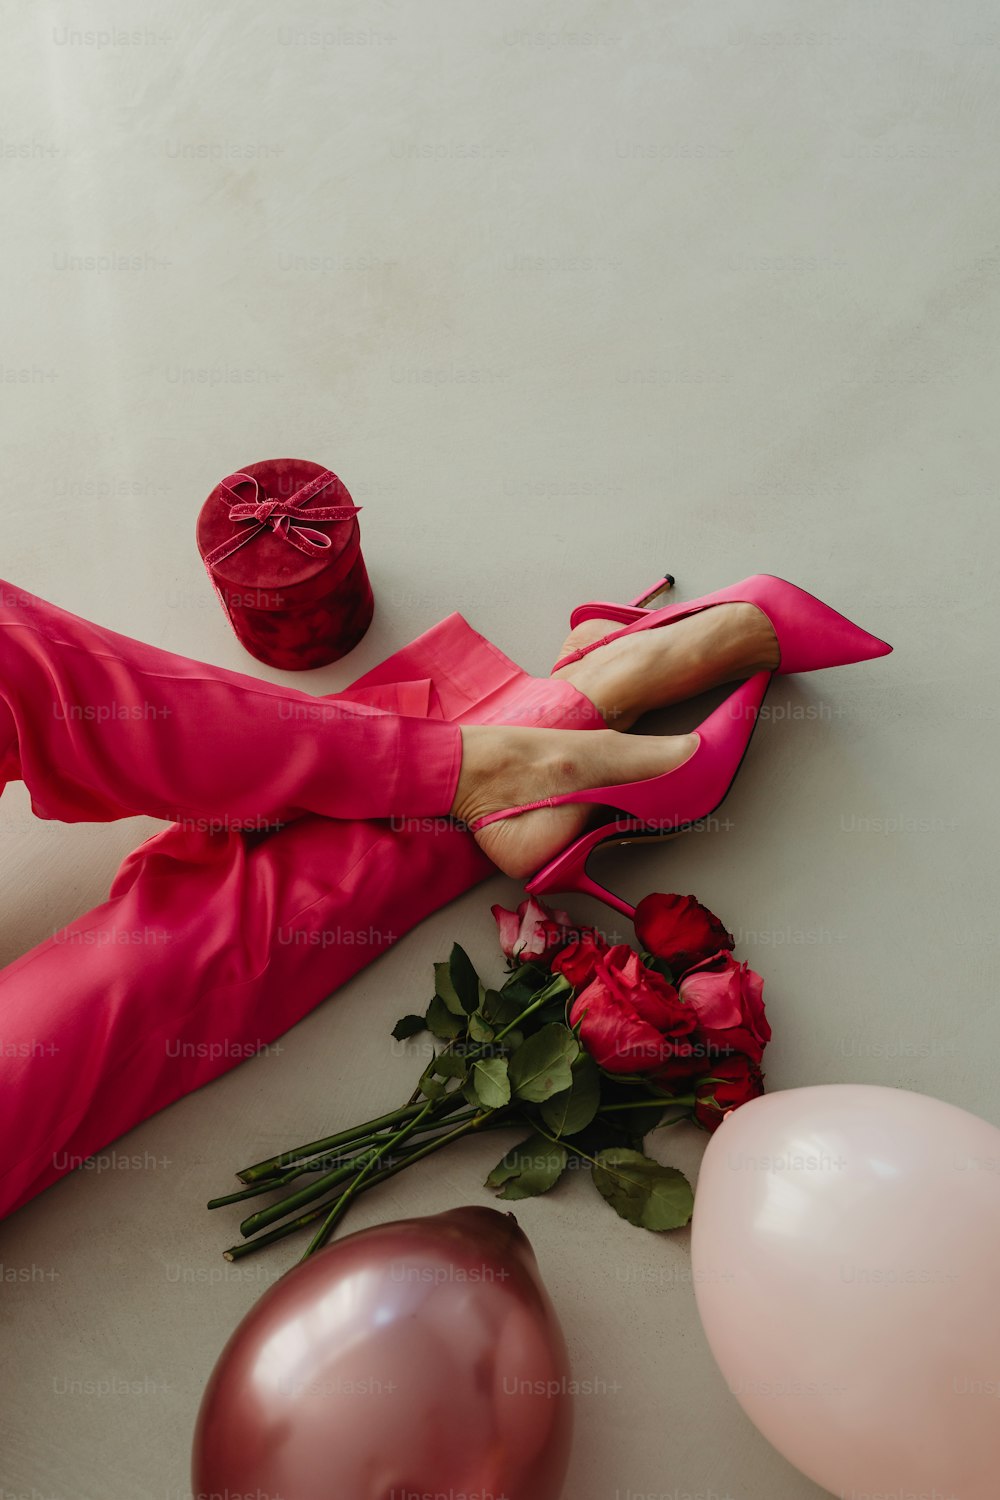 a woman's feet in pink shoes next to balloons and balloons